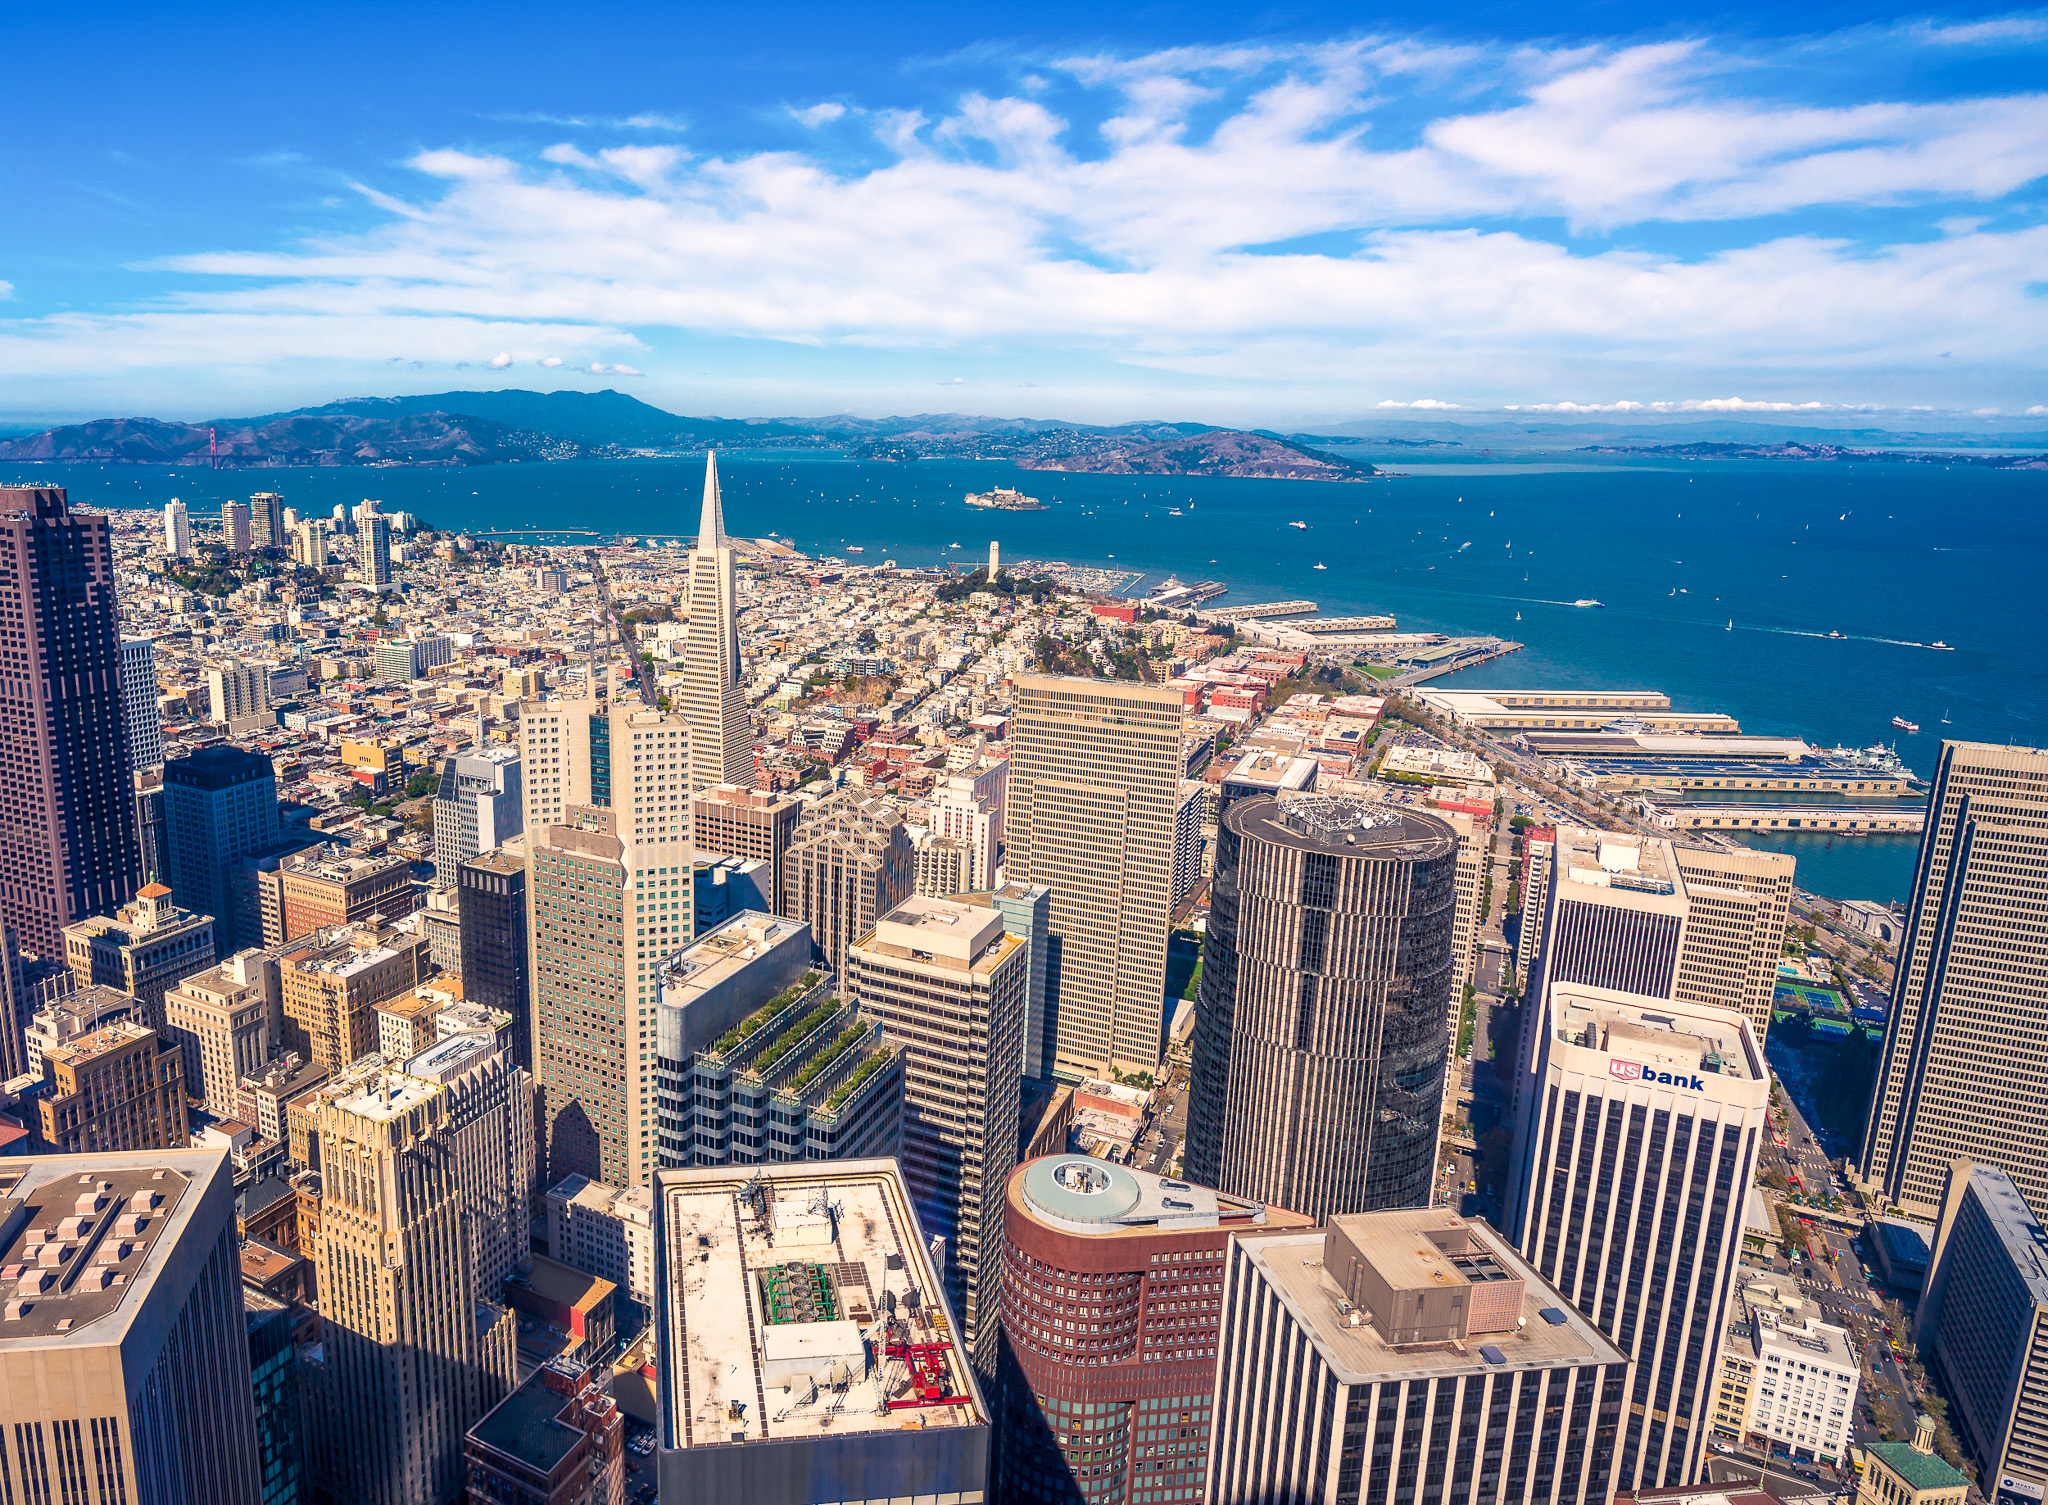 1 - Attract diverse industries - aerial-cityscape-view-of-san-francisco-2021-08-26-15-46-20-utc_0